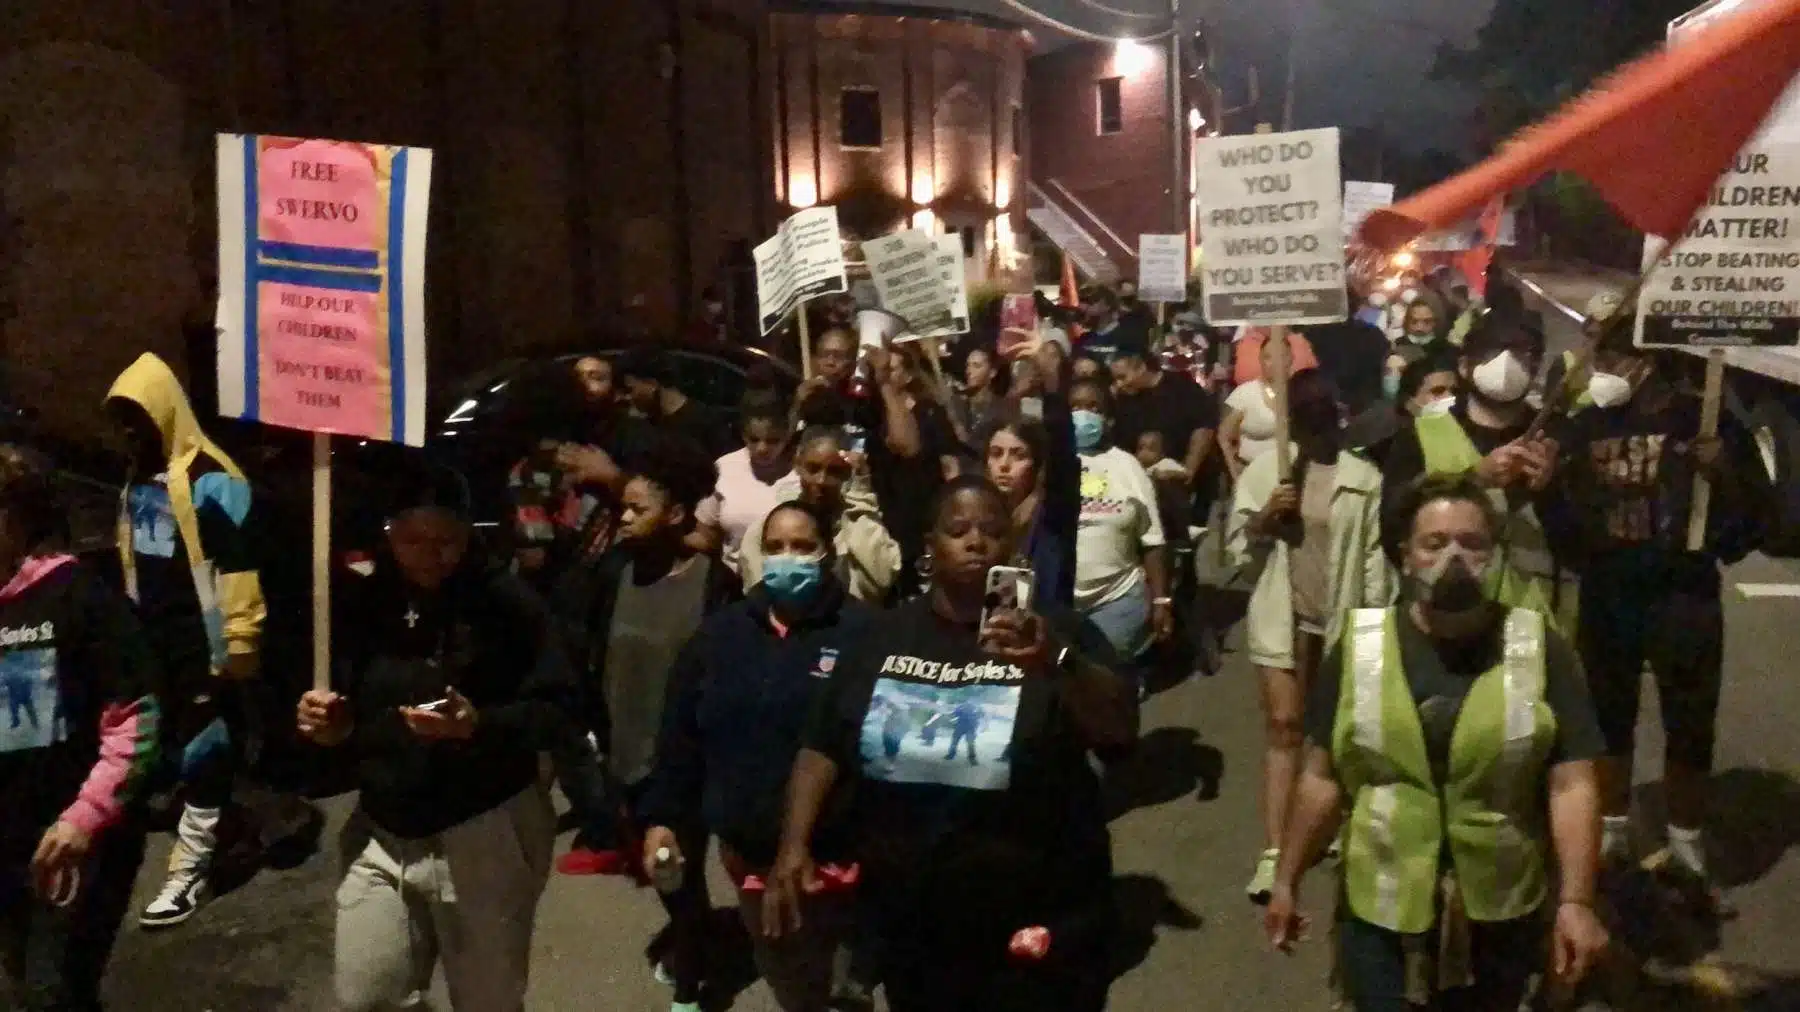 Rhode Island News: Families march against police violence – “Stop beating our children!”